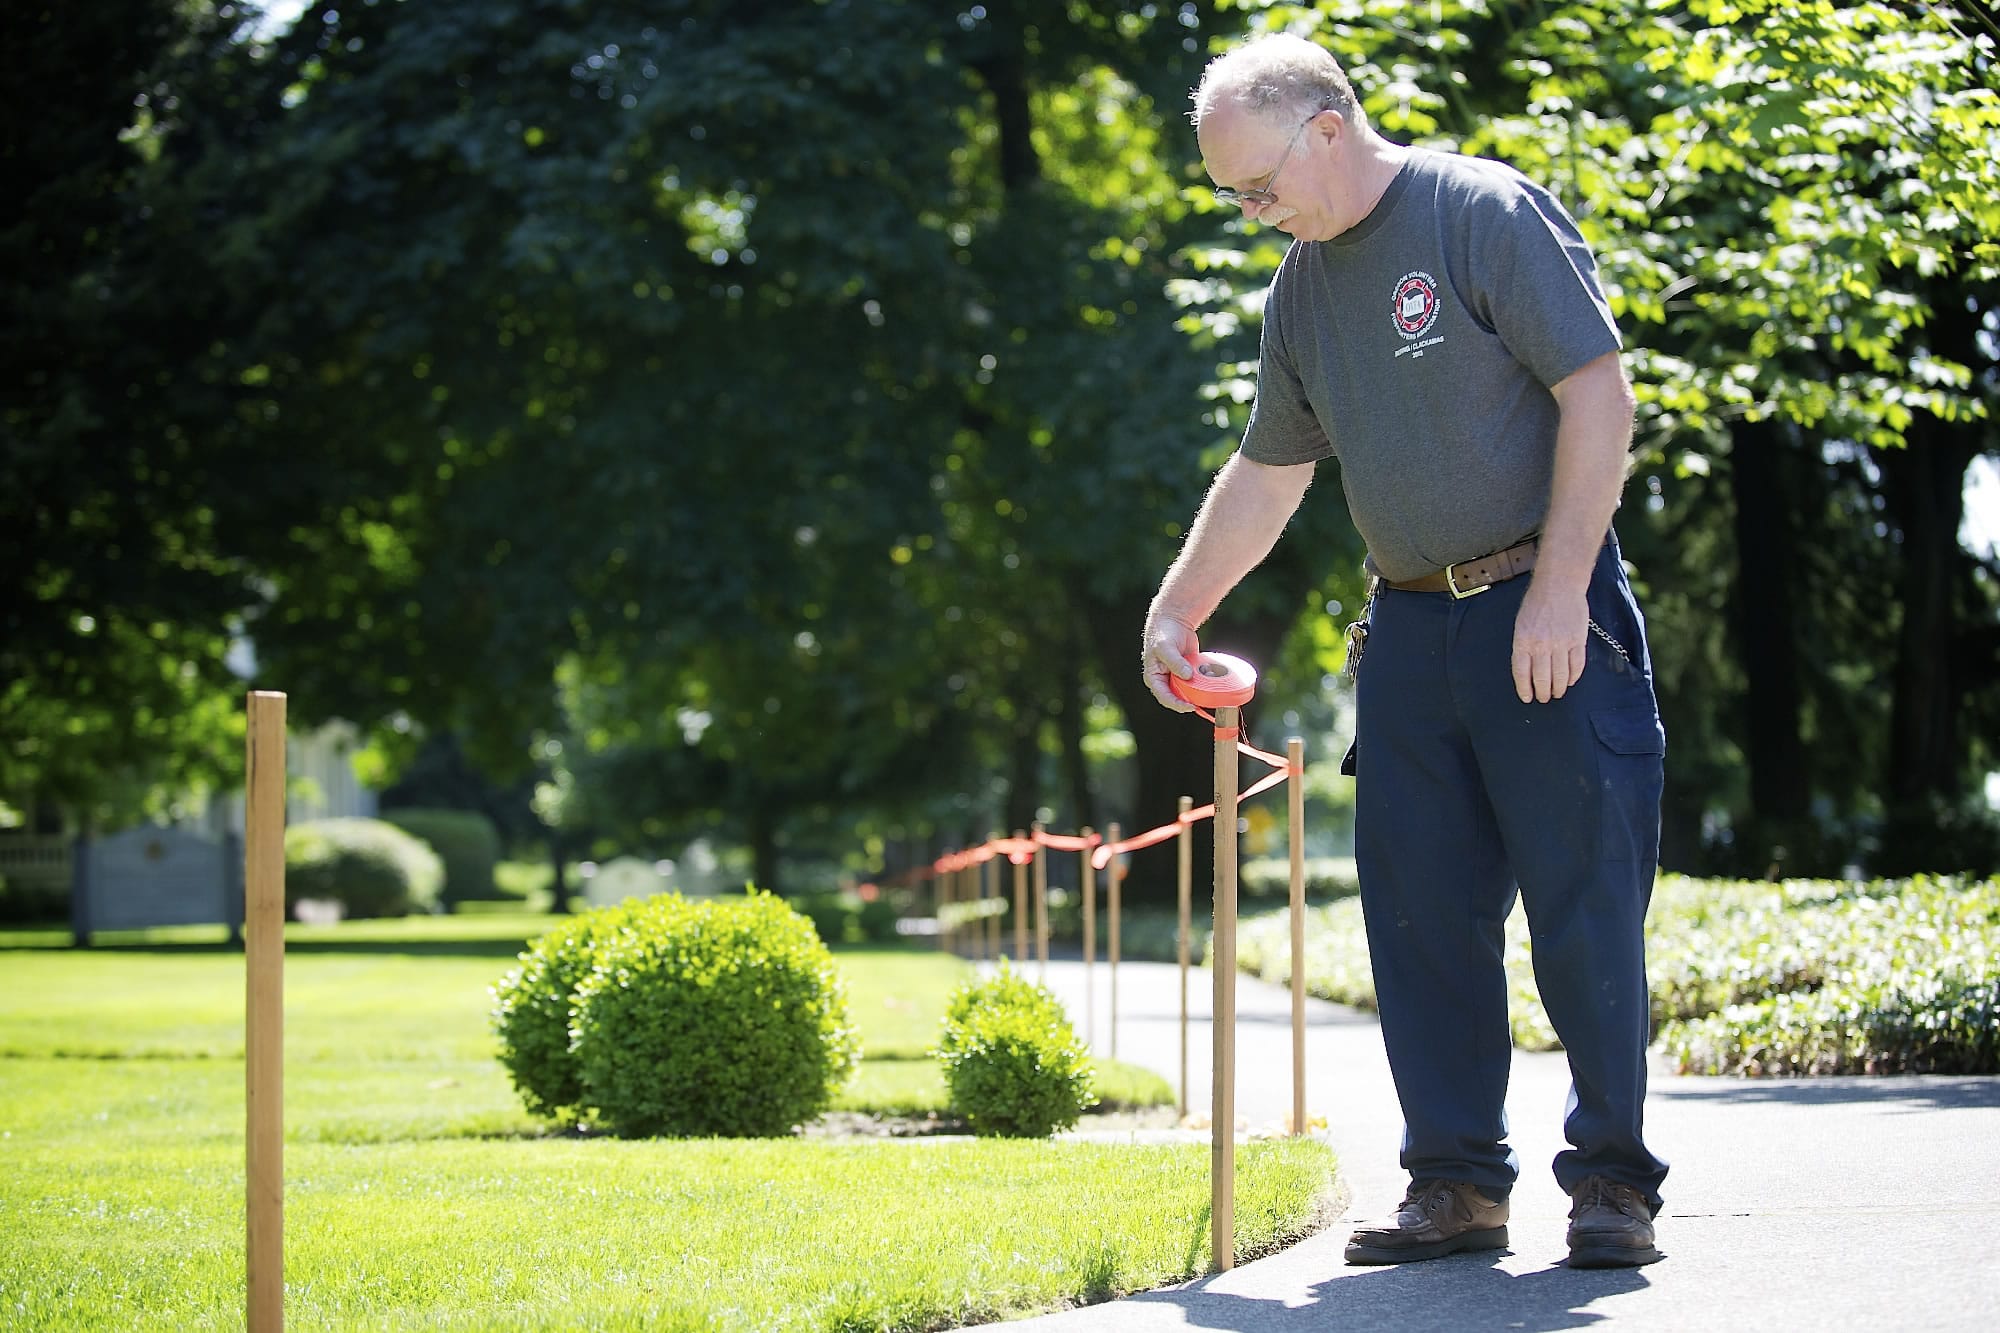 Fred Munhoven, a historical preservation specialist for the Fort Vancouver National Trust, sets up a tape barrier along Officers Row Tuesday as part of preparations for Independence Day at Fort Vancouver. Munhoven says he typically works 16 to 18 hours on the Fourth of July staring at 6 a.m.